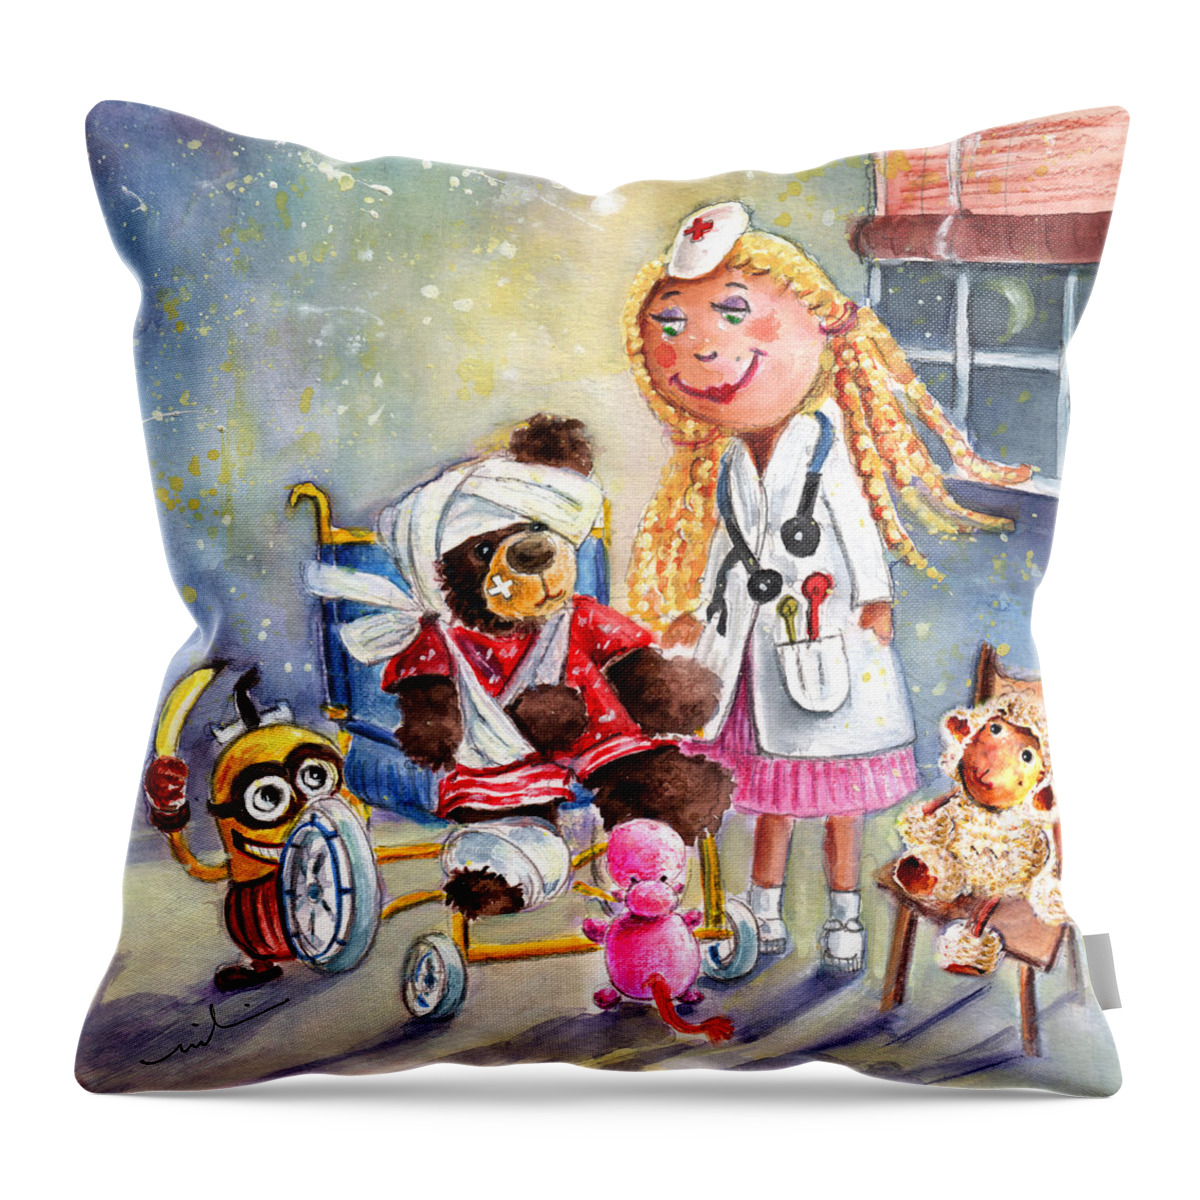 Animals Throw Pillow featuring the painting Truffle McFurry And The Minion by Miki De Goodaboom